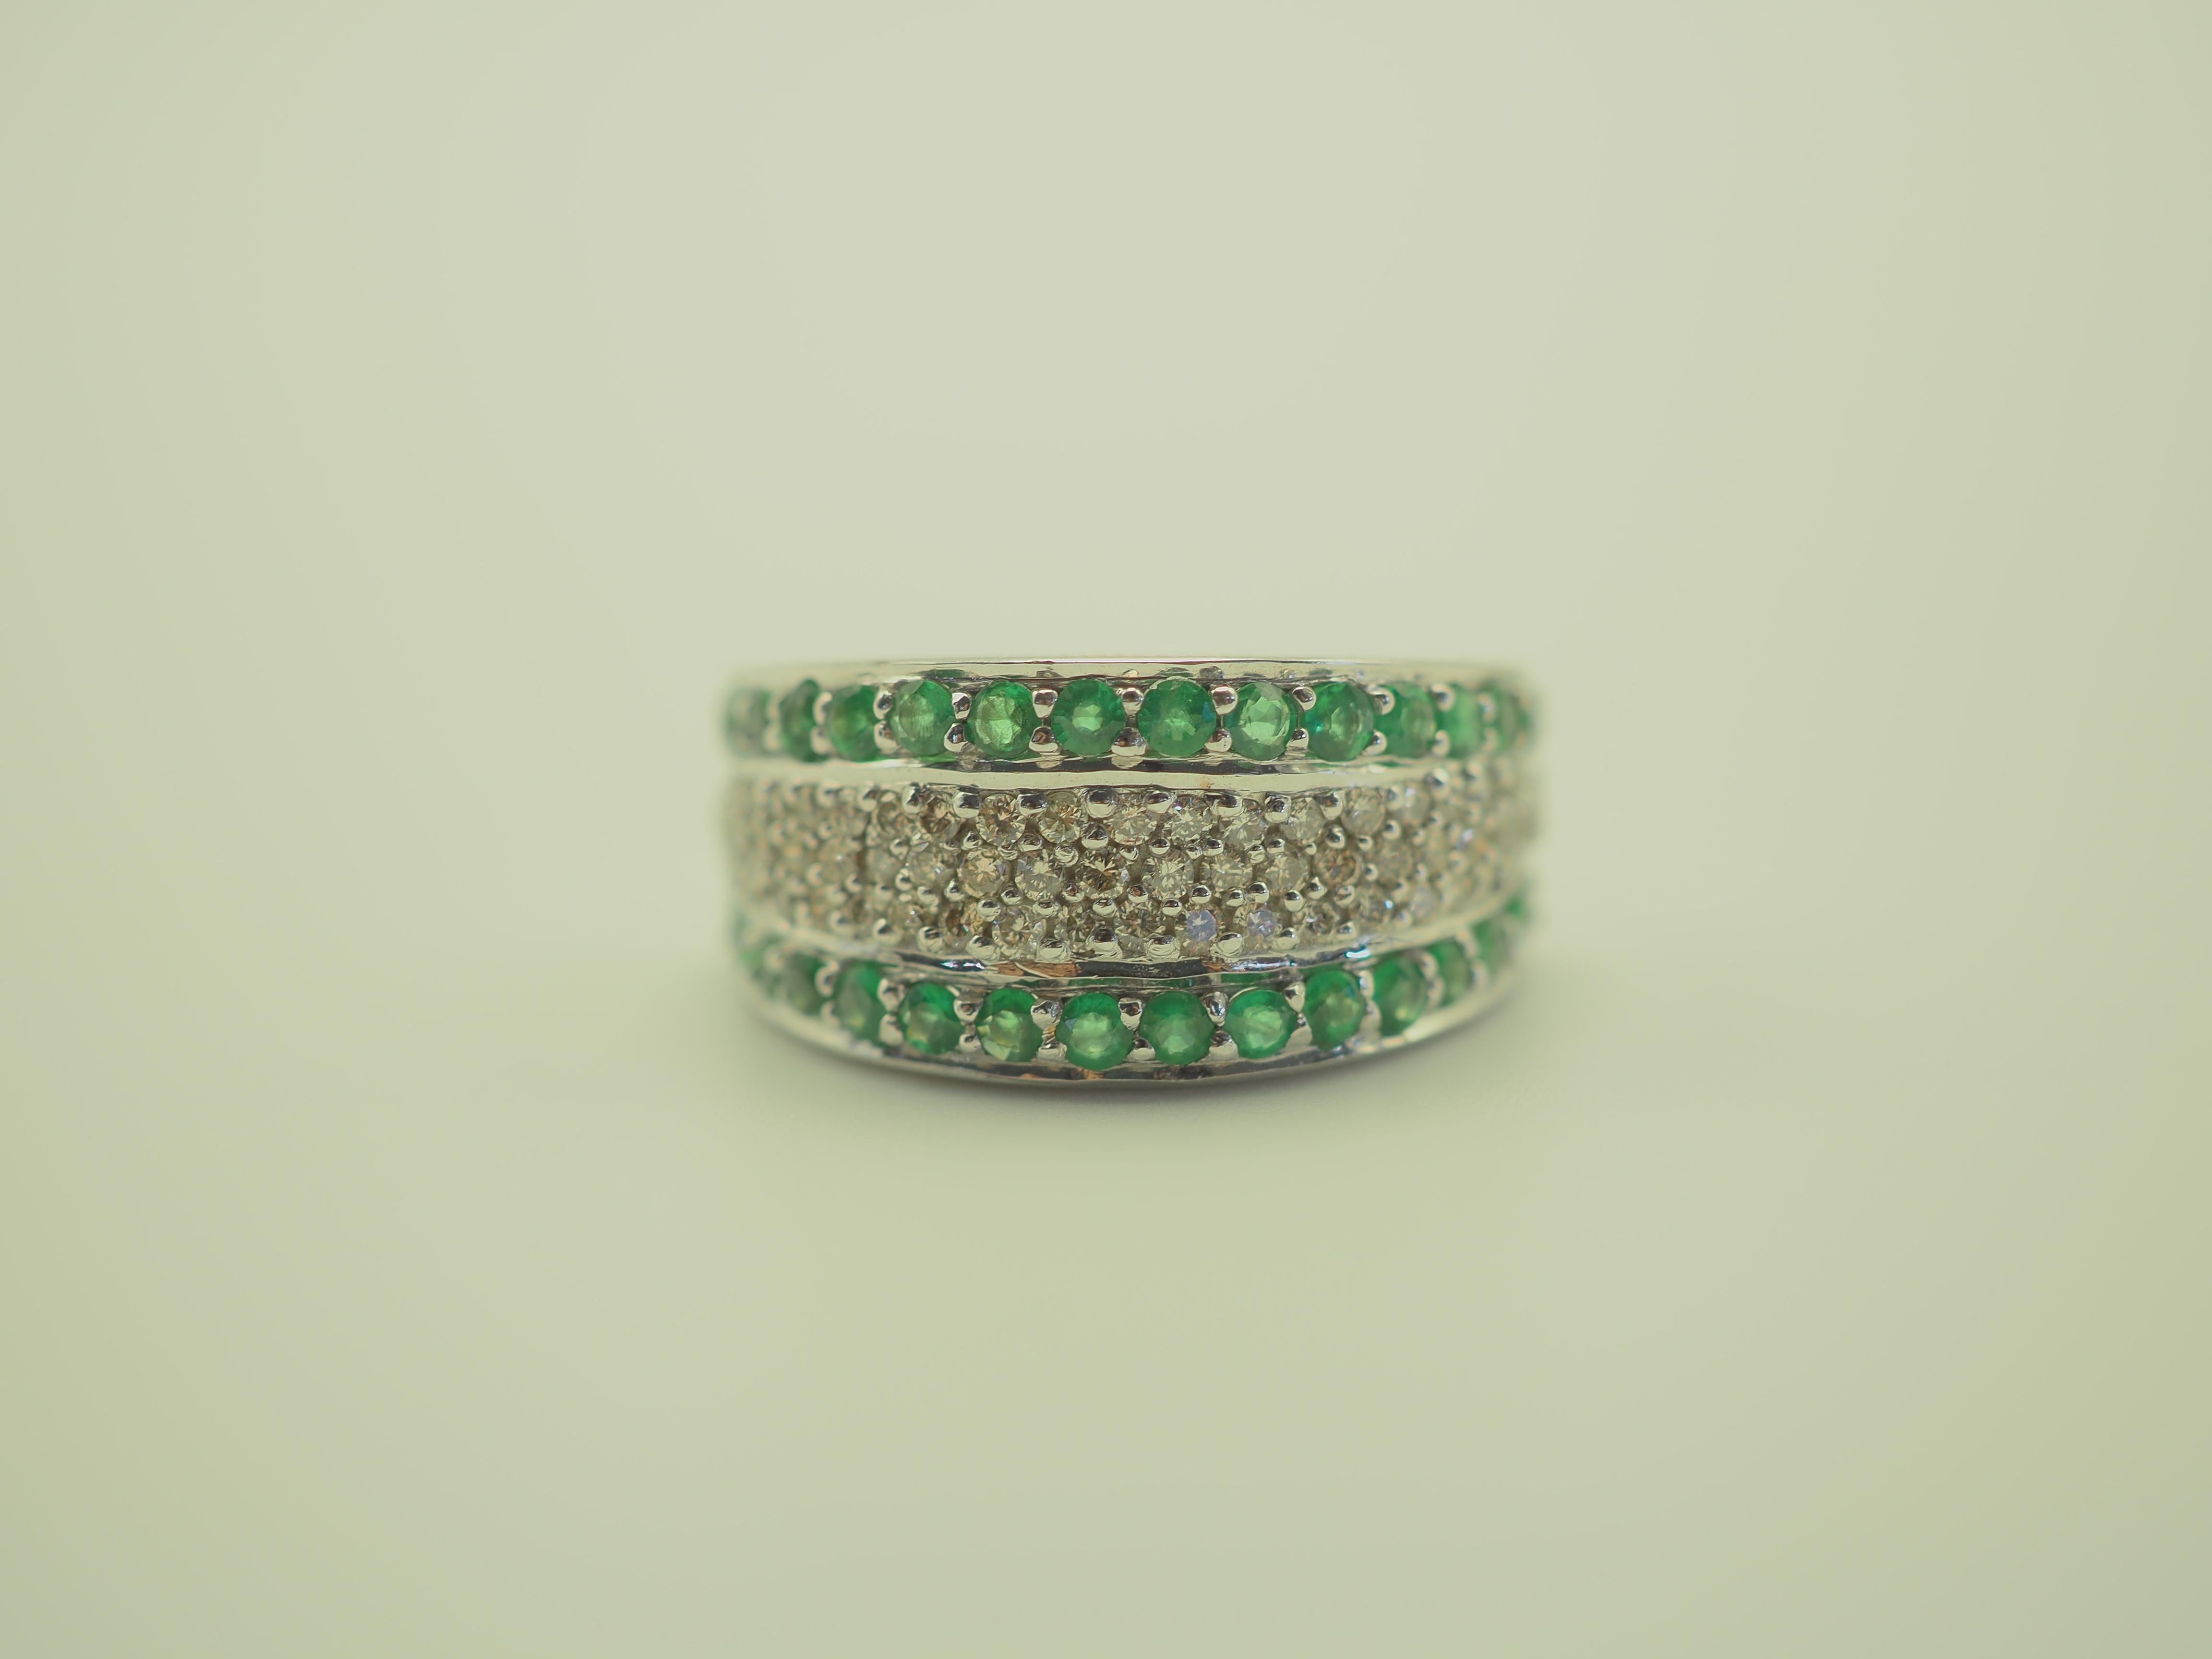 A gorgeous luxury Neo-vintage chunky and fancy band ring. This ring is immaculately designed. The round cut emeralds have a beautiful bright green hue, and the round diamonds are very bright and clean. Wide band and very comfortable, this ring is